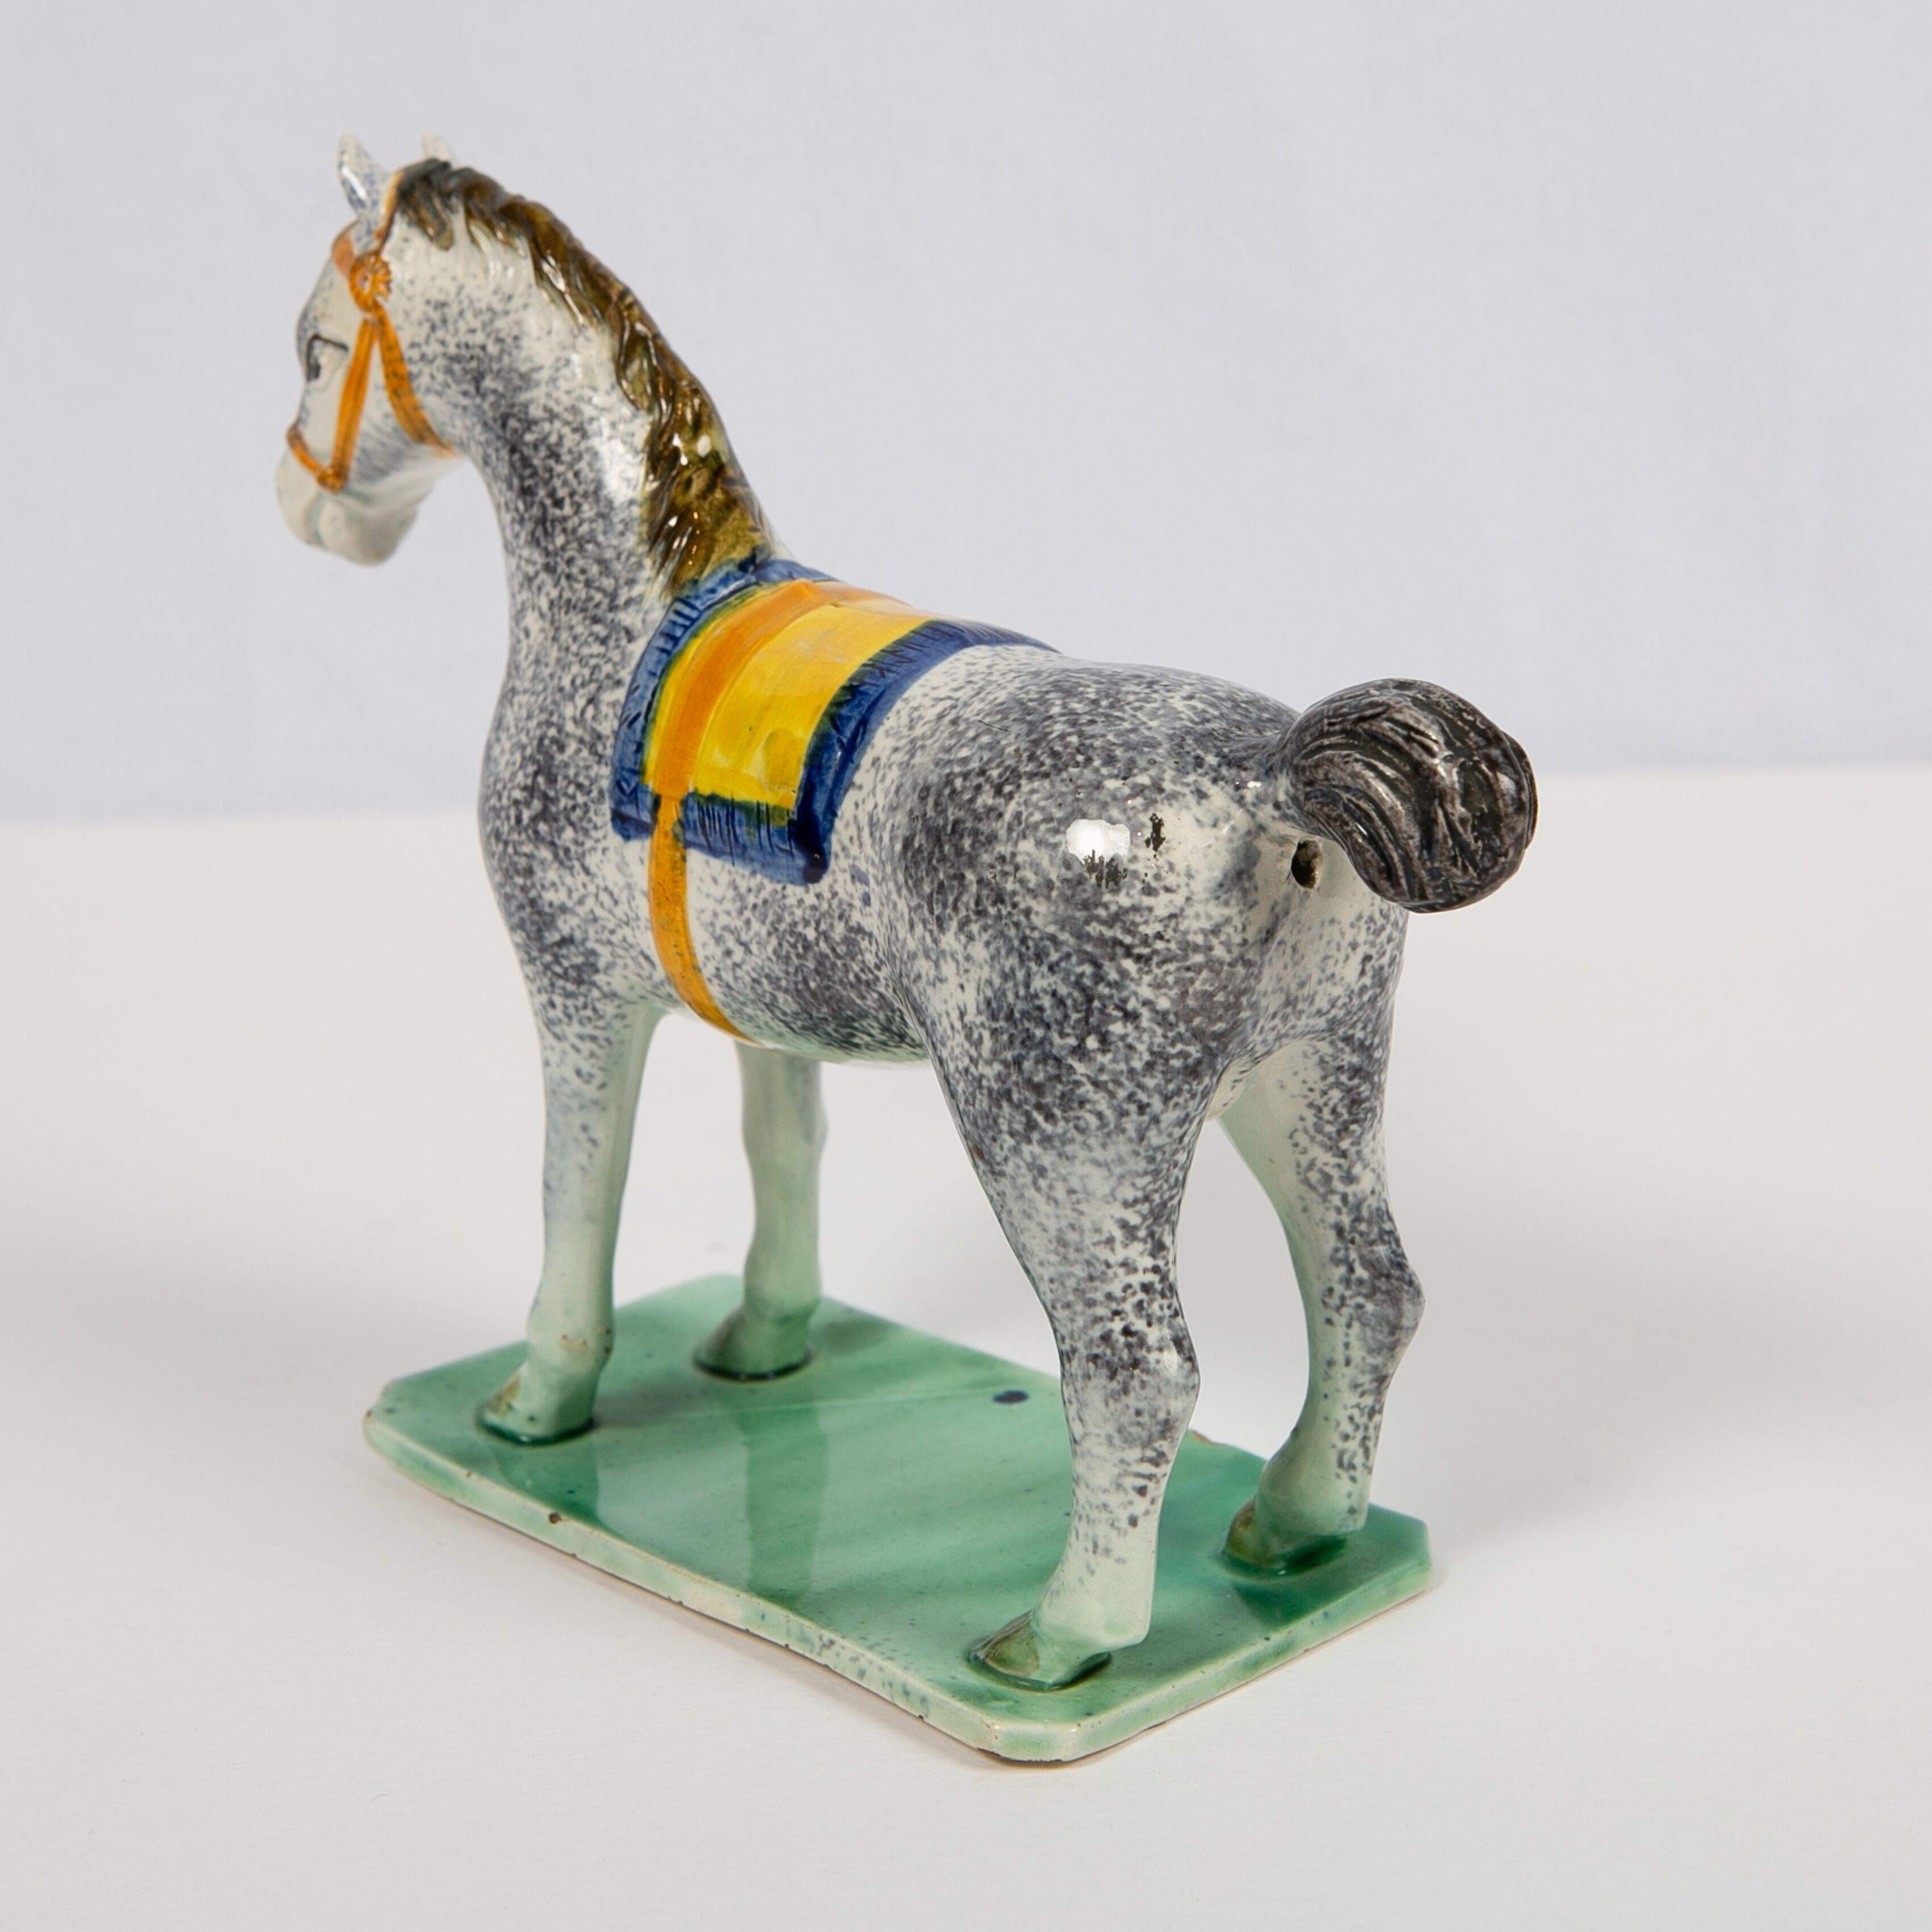 19th Century Antique Pottery Horse Made in England at St. Anthony's Pottery, circa 1800-1810